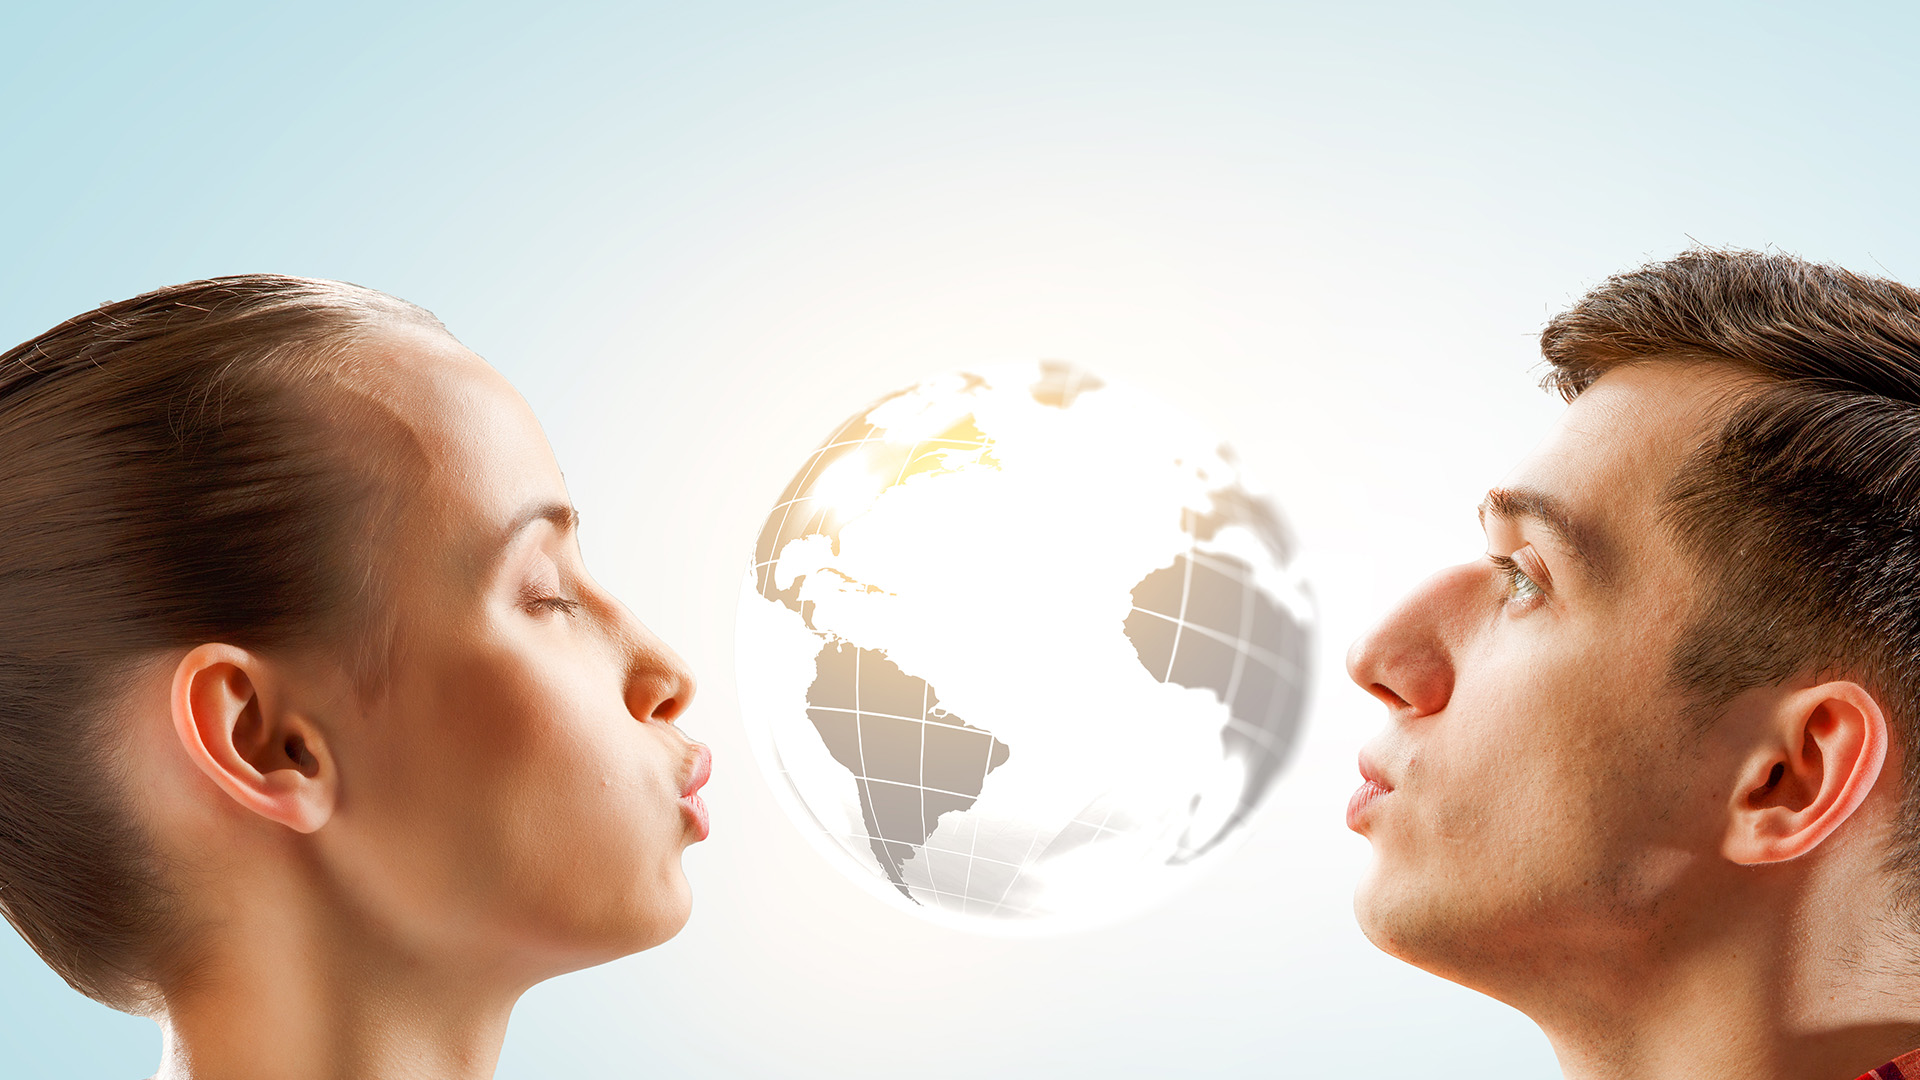 Brunette man and woman facing each other and leaning in for a kiss, with a white globe between them.